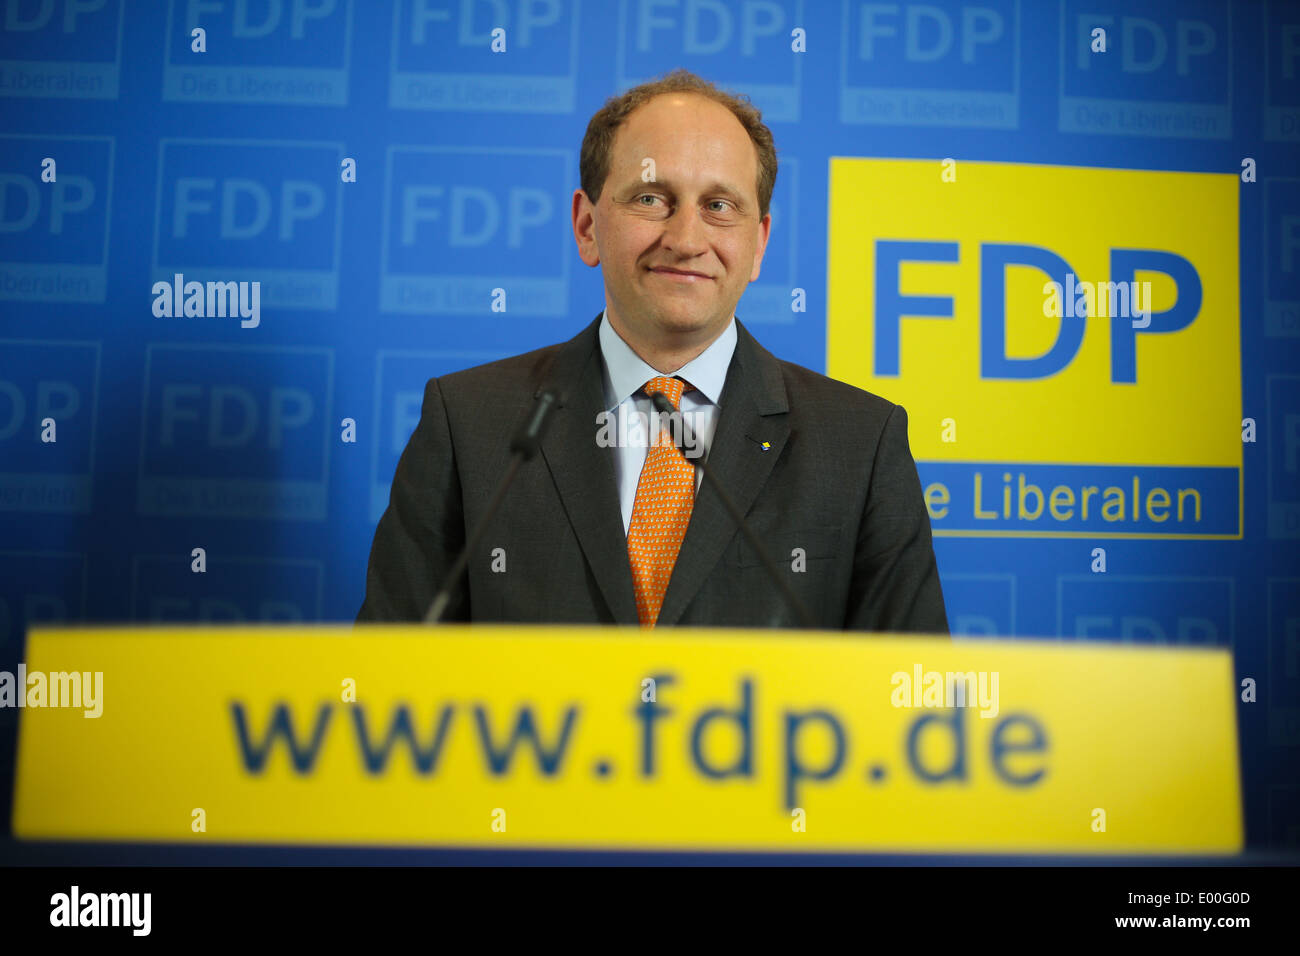 Berlin, Germany. 28th Apr, 2014. BERLIN, GERMANY - APRIL 28: Top candidate of Free Democratic Party for the European Parliament, Count Alexander Lambsdorff (FDP) attends a press conference with Chairman of German Free Democratic Party (FDP) Christian Lindner (unseen) at Thomas-Dehler Haus on April 28, 2014 in Berlin, Germany. // Pictured: Count Alexander Lambsdorff © Christian Marquardt/NurPhoto/ZUMAPRESS.com/Alamy Live News Stock Photo